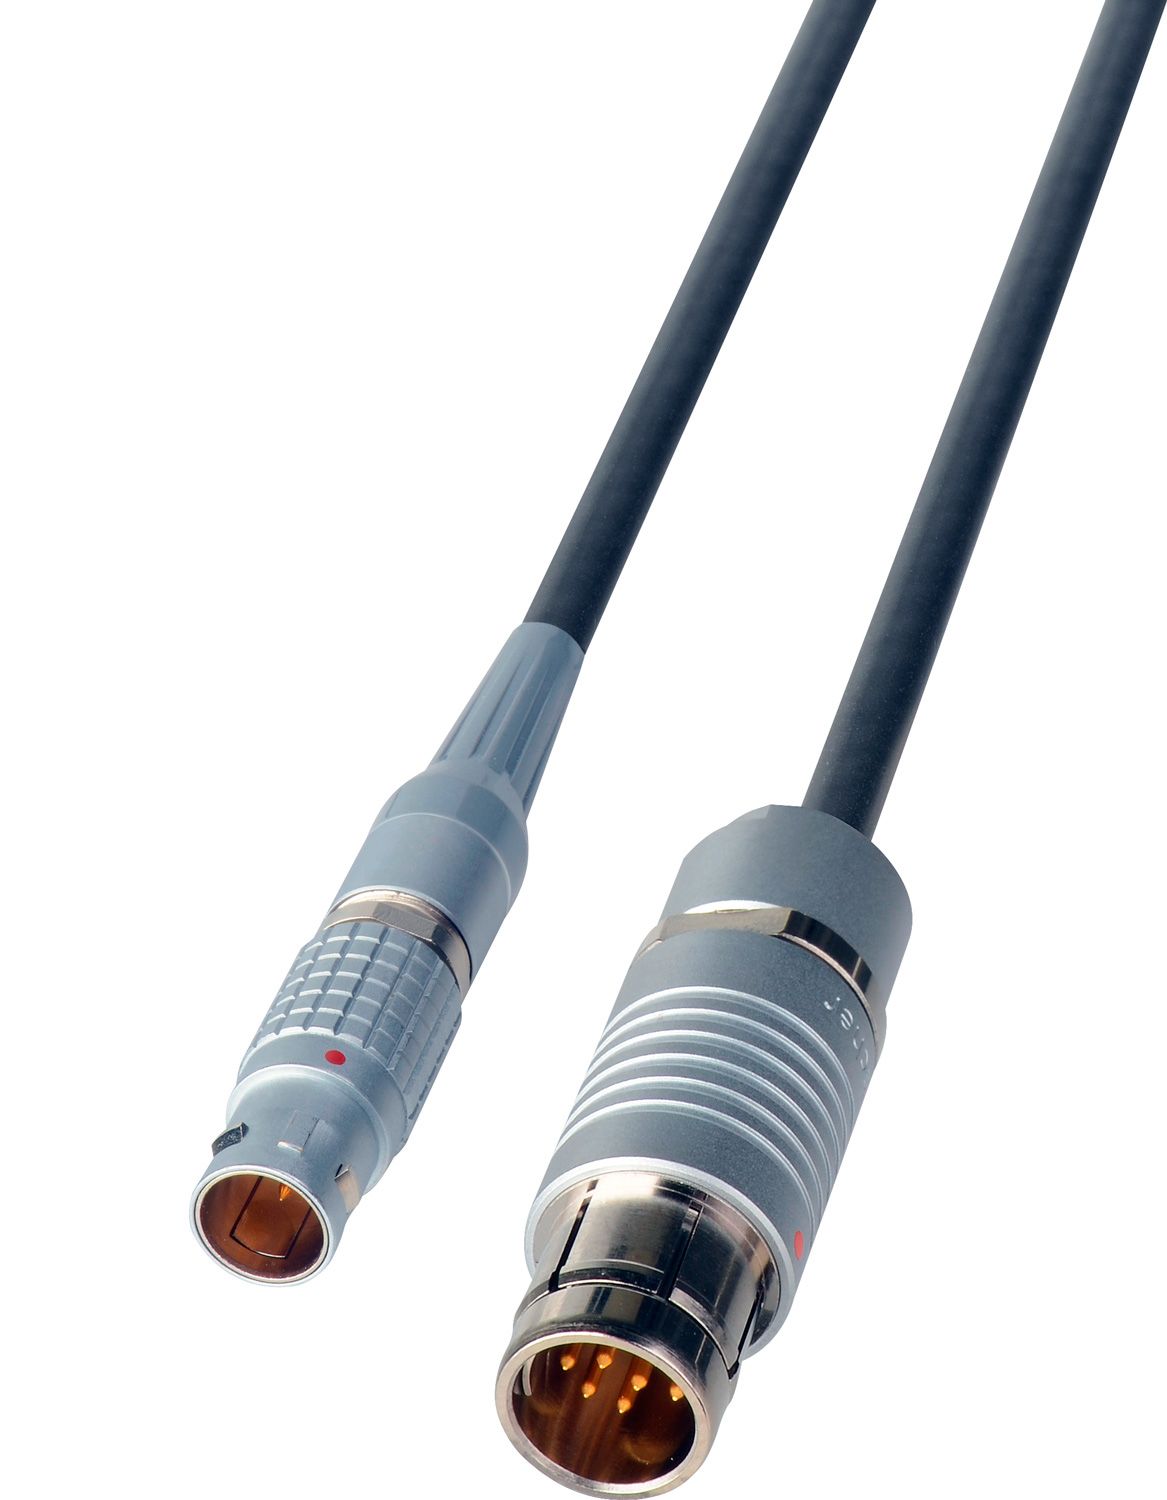 Teradek Power Cable Lemo 2 Pin Male to Fischer 11 Pin Male